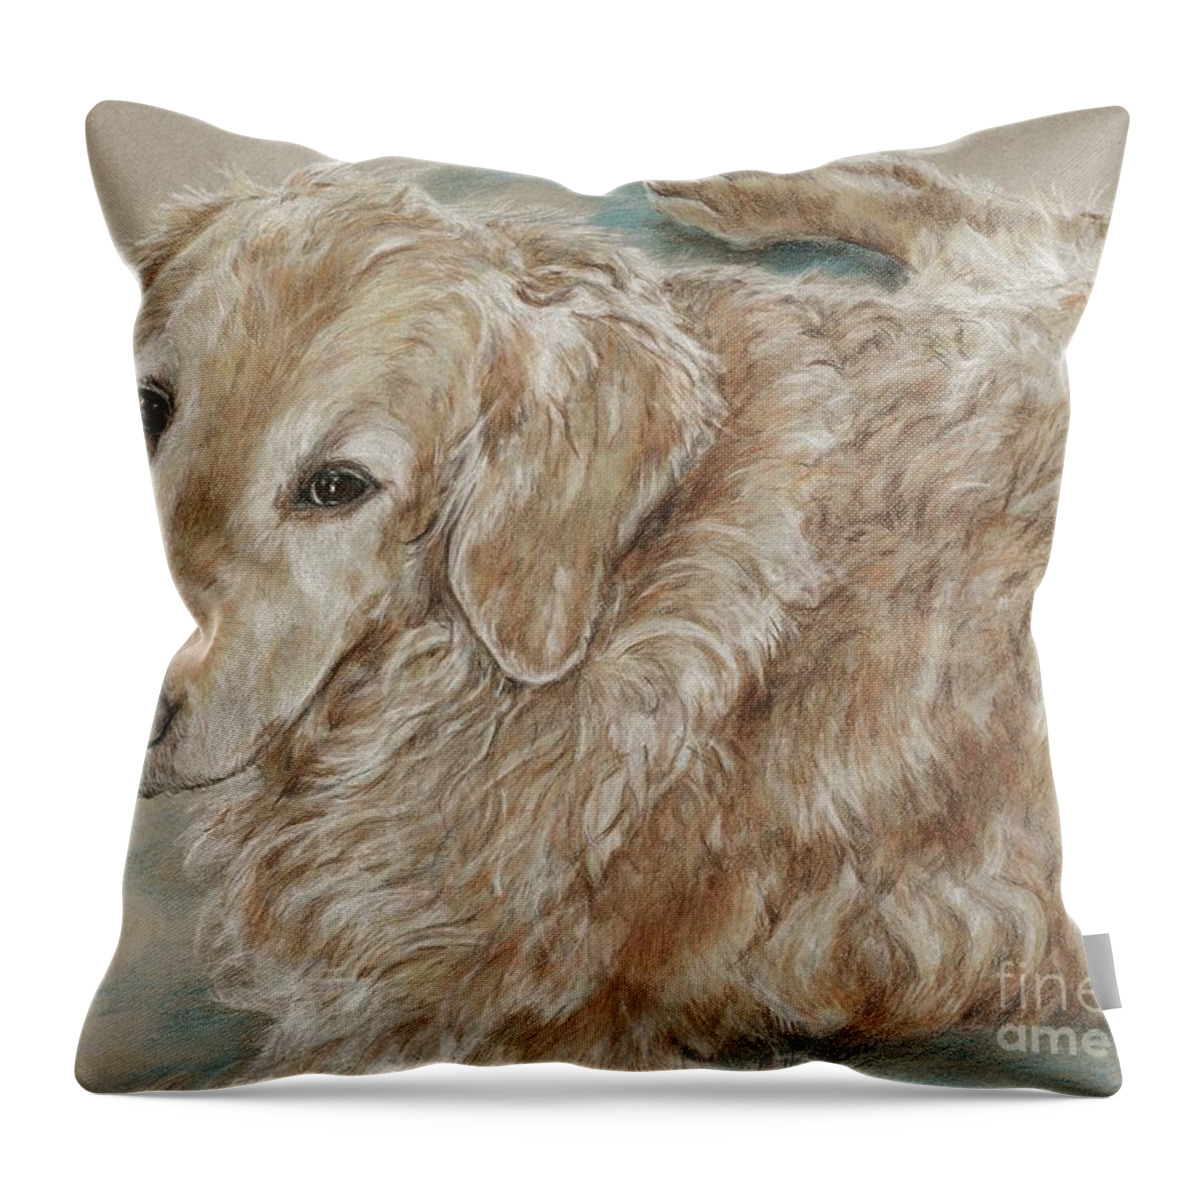 Dog Throw Pillow featuring the drawing Maddie by Meagan Visser